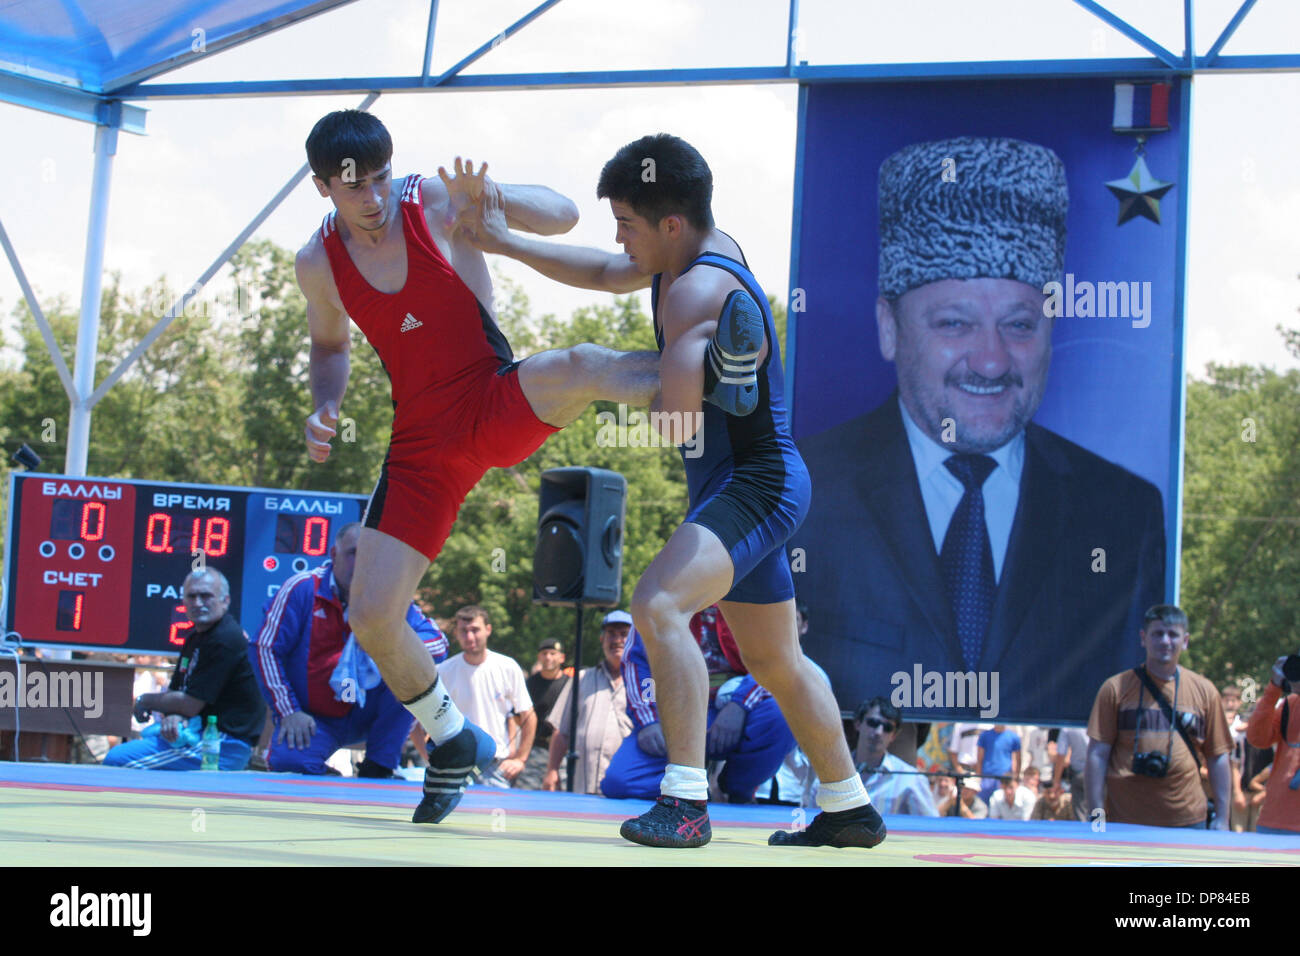 Chechen-Russian and  U.S. wrestlers took part Tuesday in a match in the war-ravaged republic of Chechnya, part of authorities` efforts to show normal life is returning.Chechnyan wrestler Beckhan Goigereev is fighting vs US wrestler.Portrait of Akhmat-Hadzhi Kadyrov is in the backgroud.(Credit Image: © PhotoXpress/ZUMA Press) RESTRICTIONS: North and South America Rights ONLY! Stock Photo